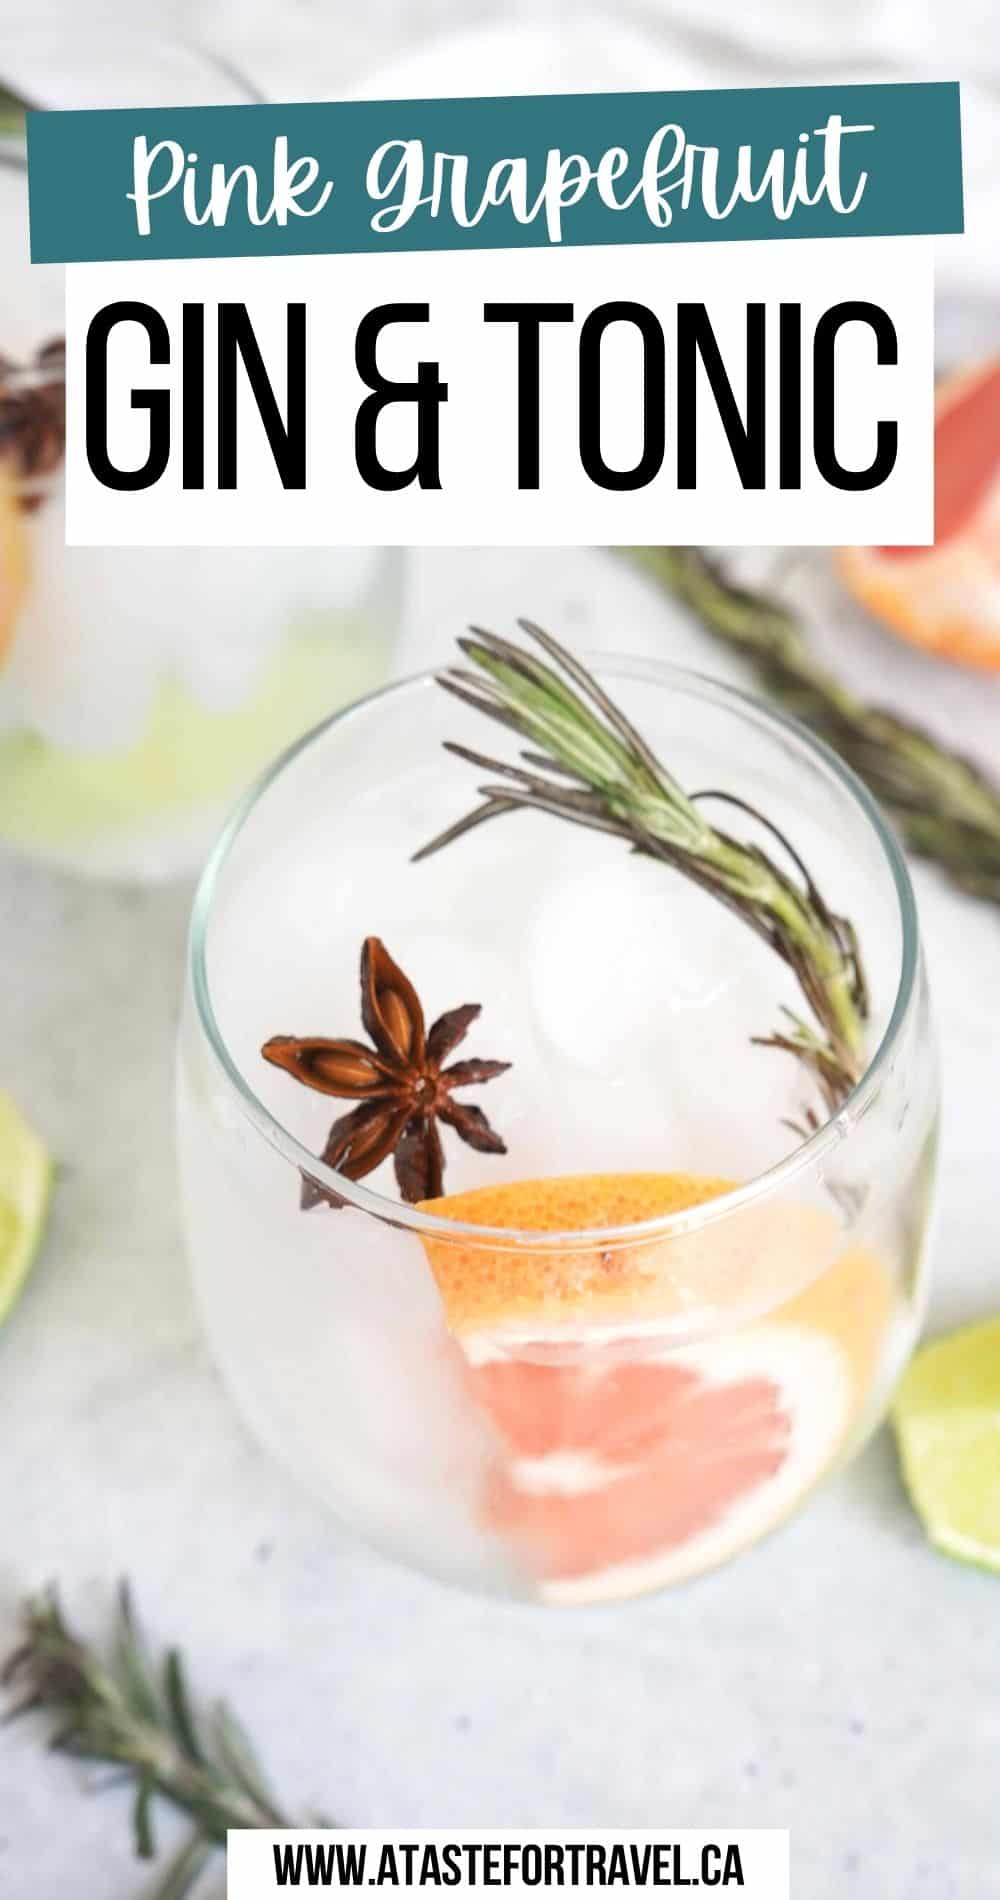 Spanish Gin and Tonic with text overlay for Pinterest.